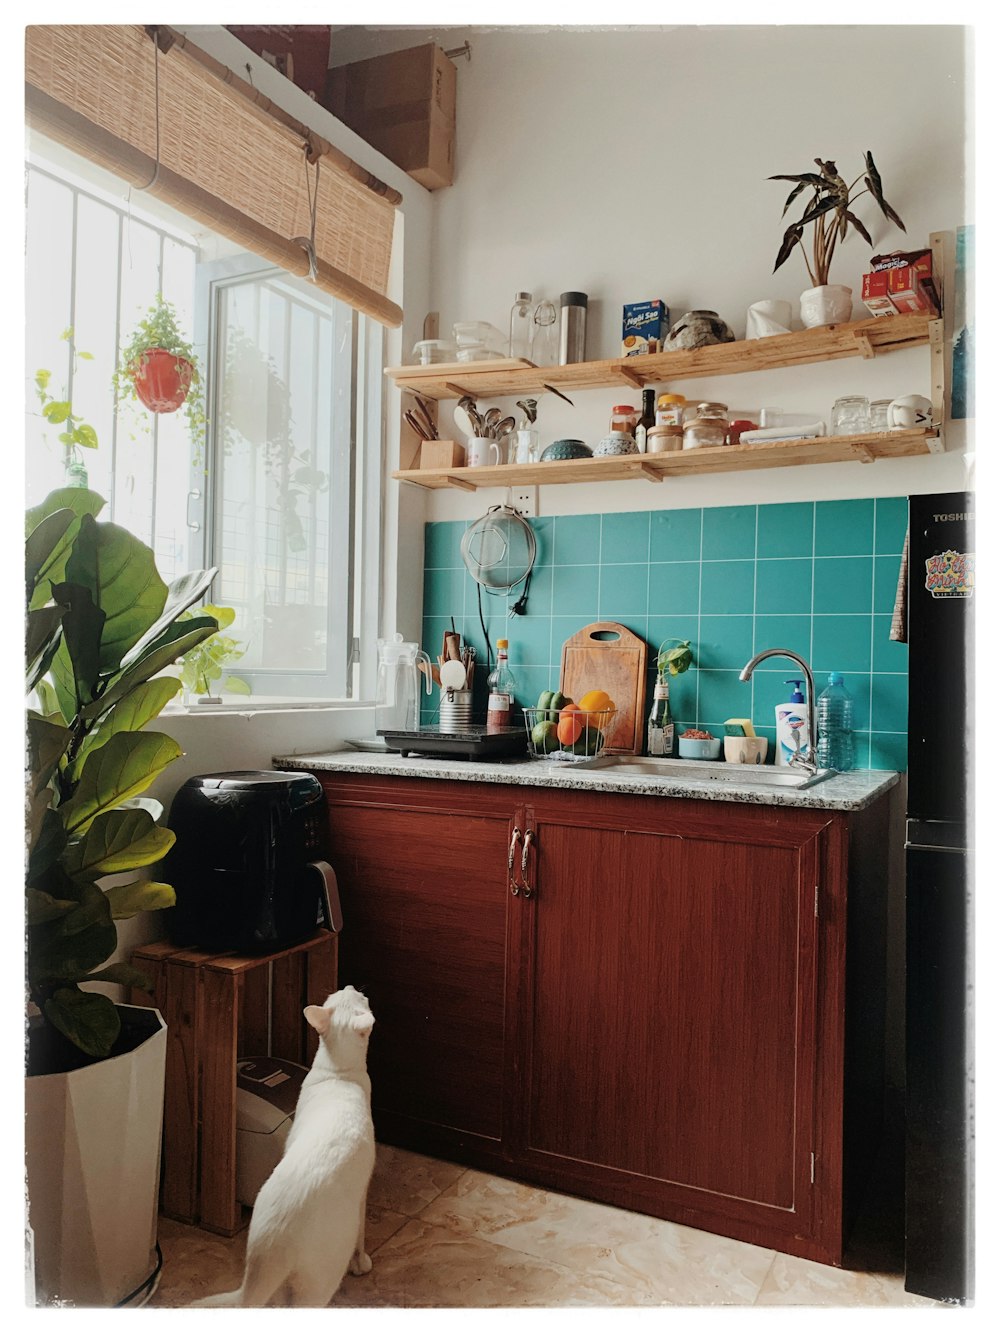 a white cat sitting on the floor in a kitchen